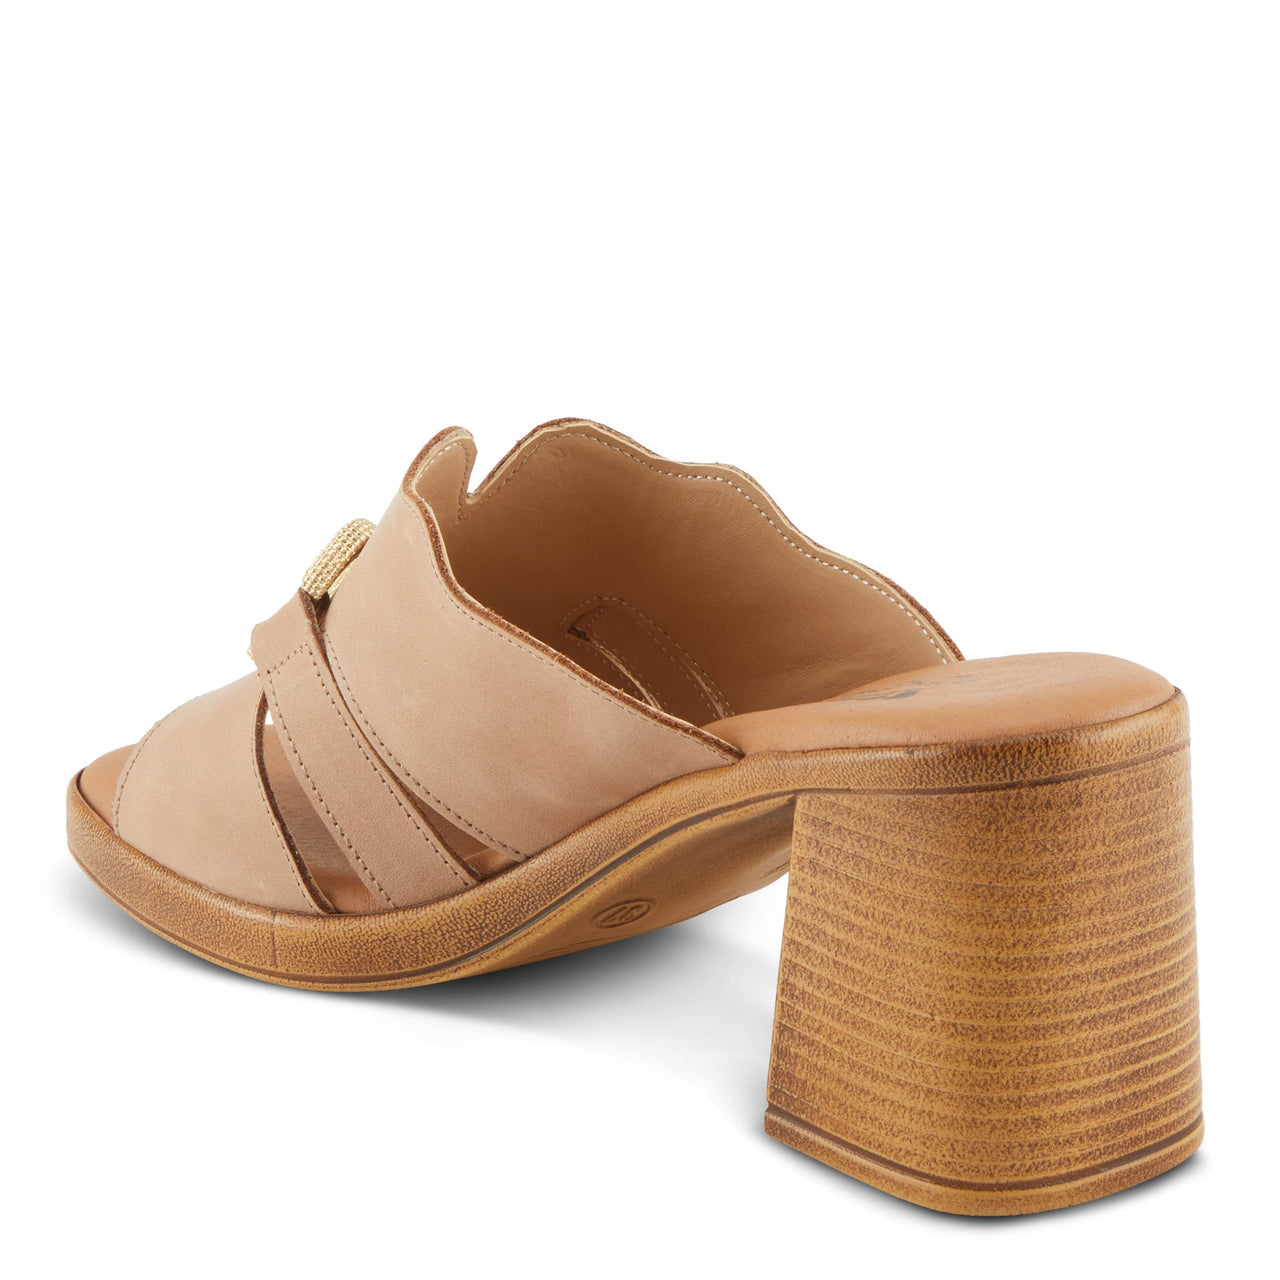  Chic Spring Step Modica Sandals in brown leather with wedge heel